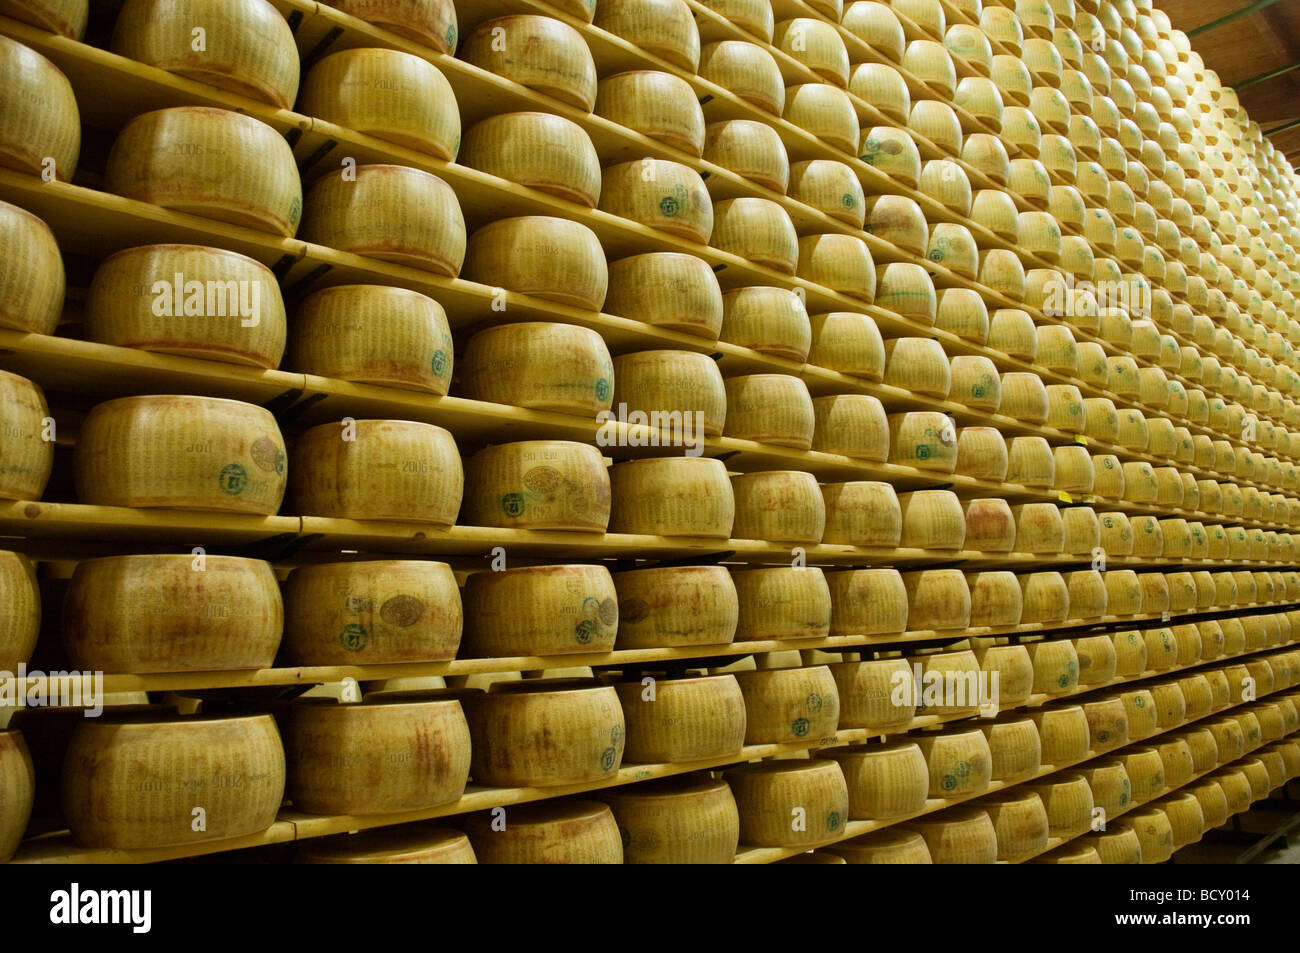 https://c8.alamy.com/comp/BCY014/cheese-factory-in-the-emilia-romagna-region-of-italy-specializes-in-BCY014.jpg